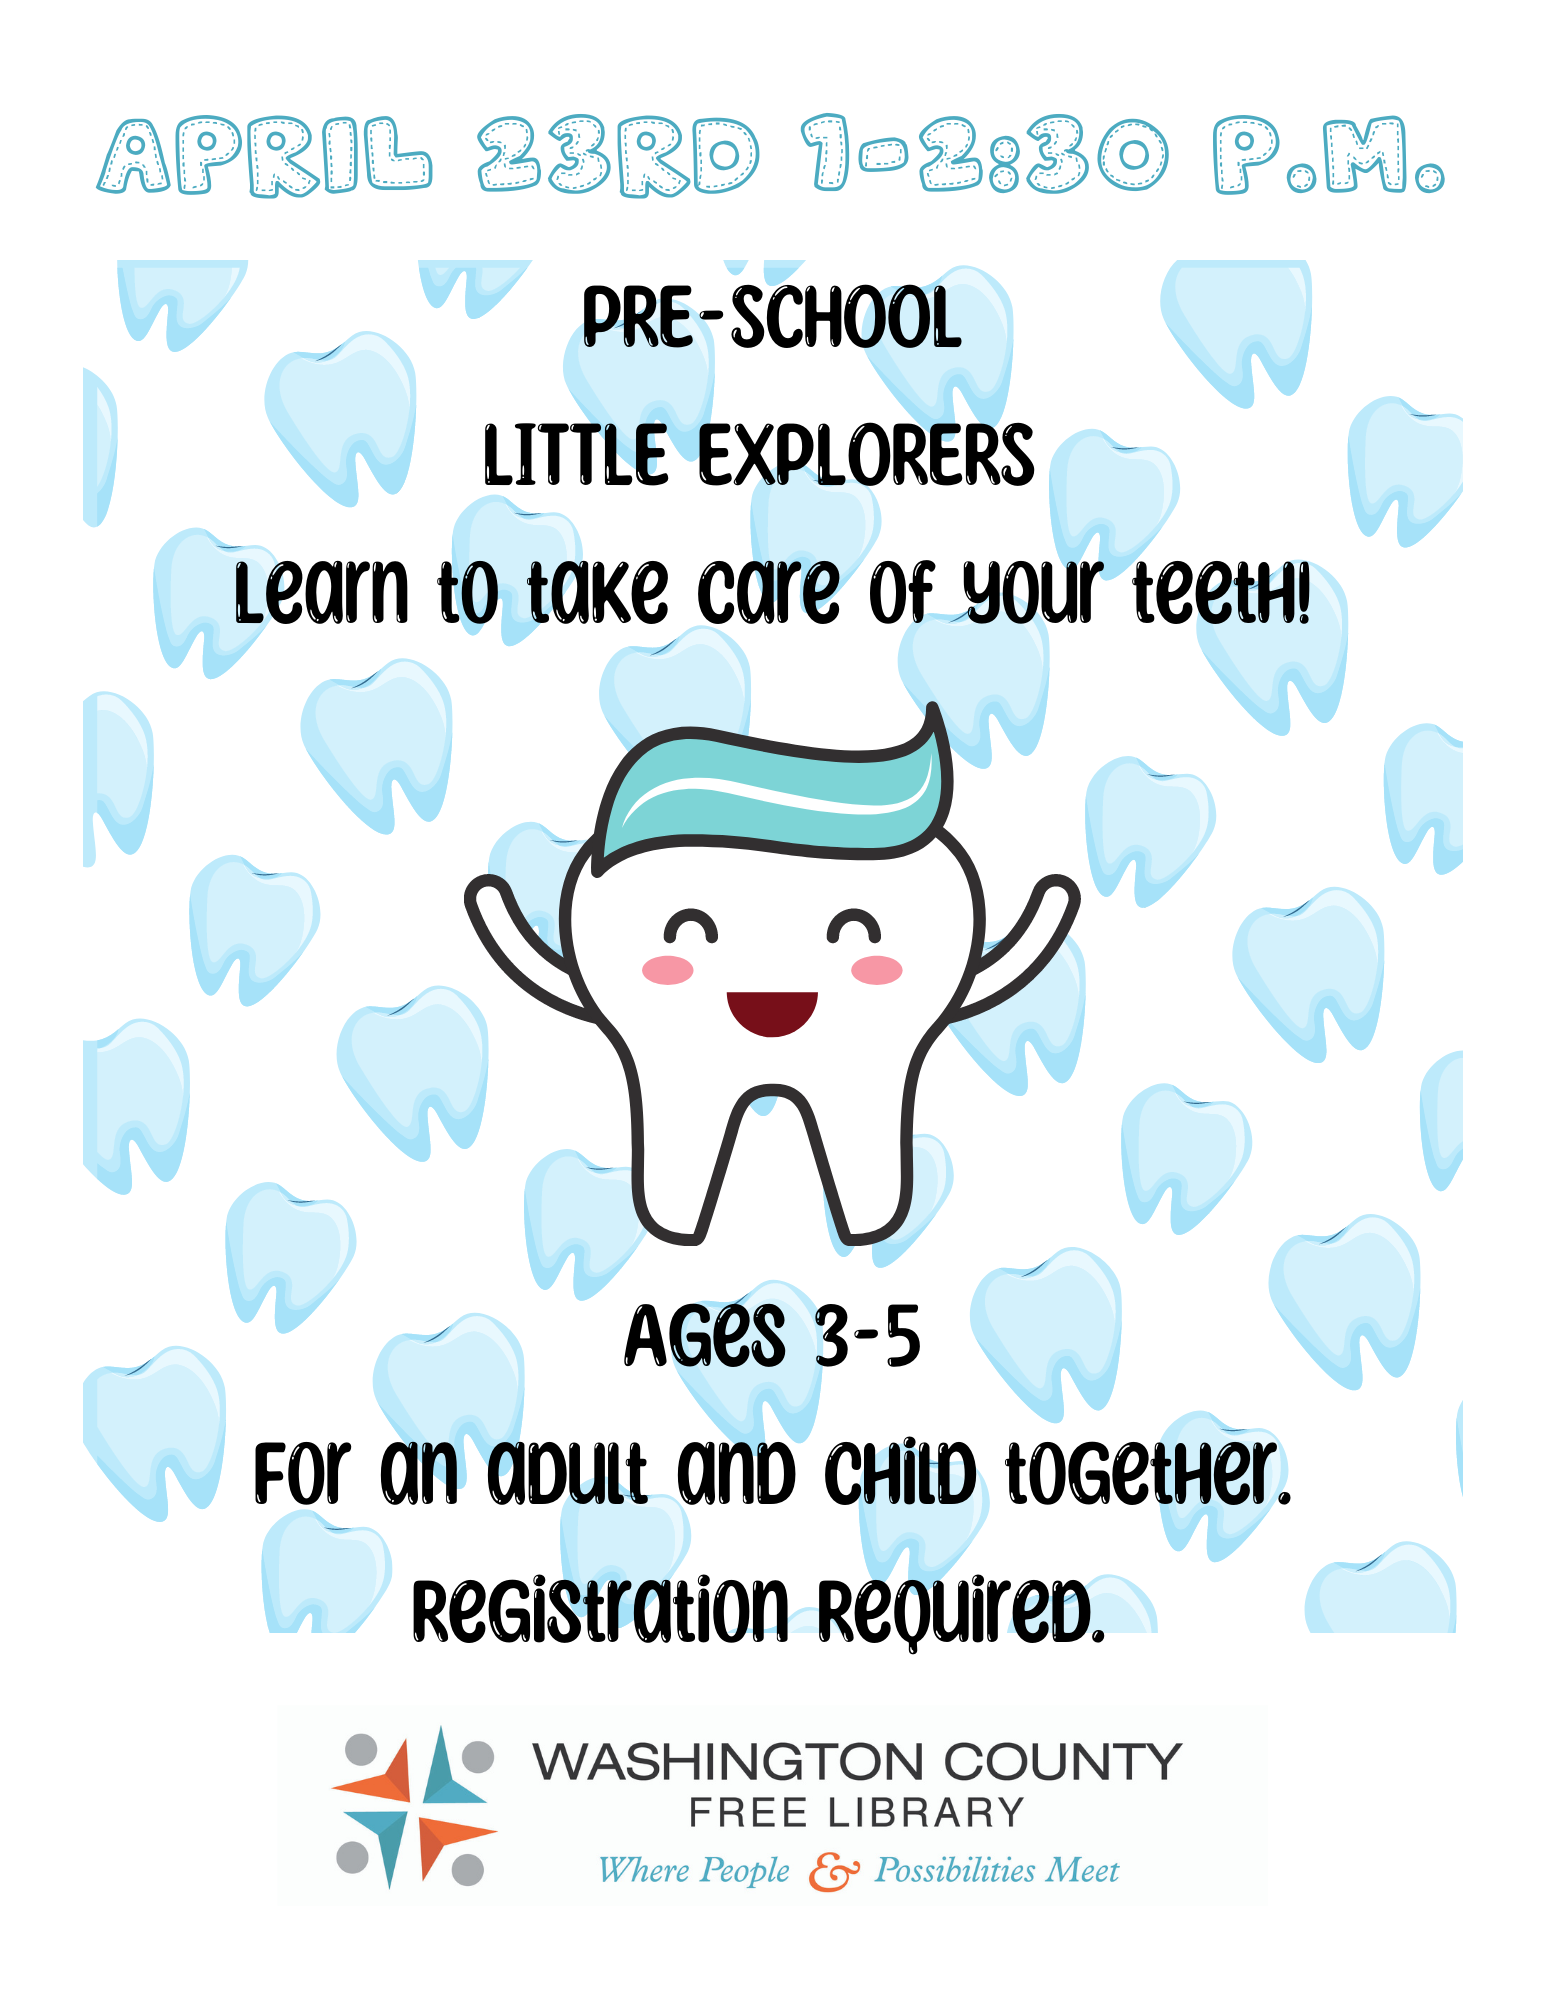 Pre-School Little Explorers - Caring for Your Teeth!